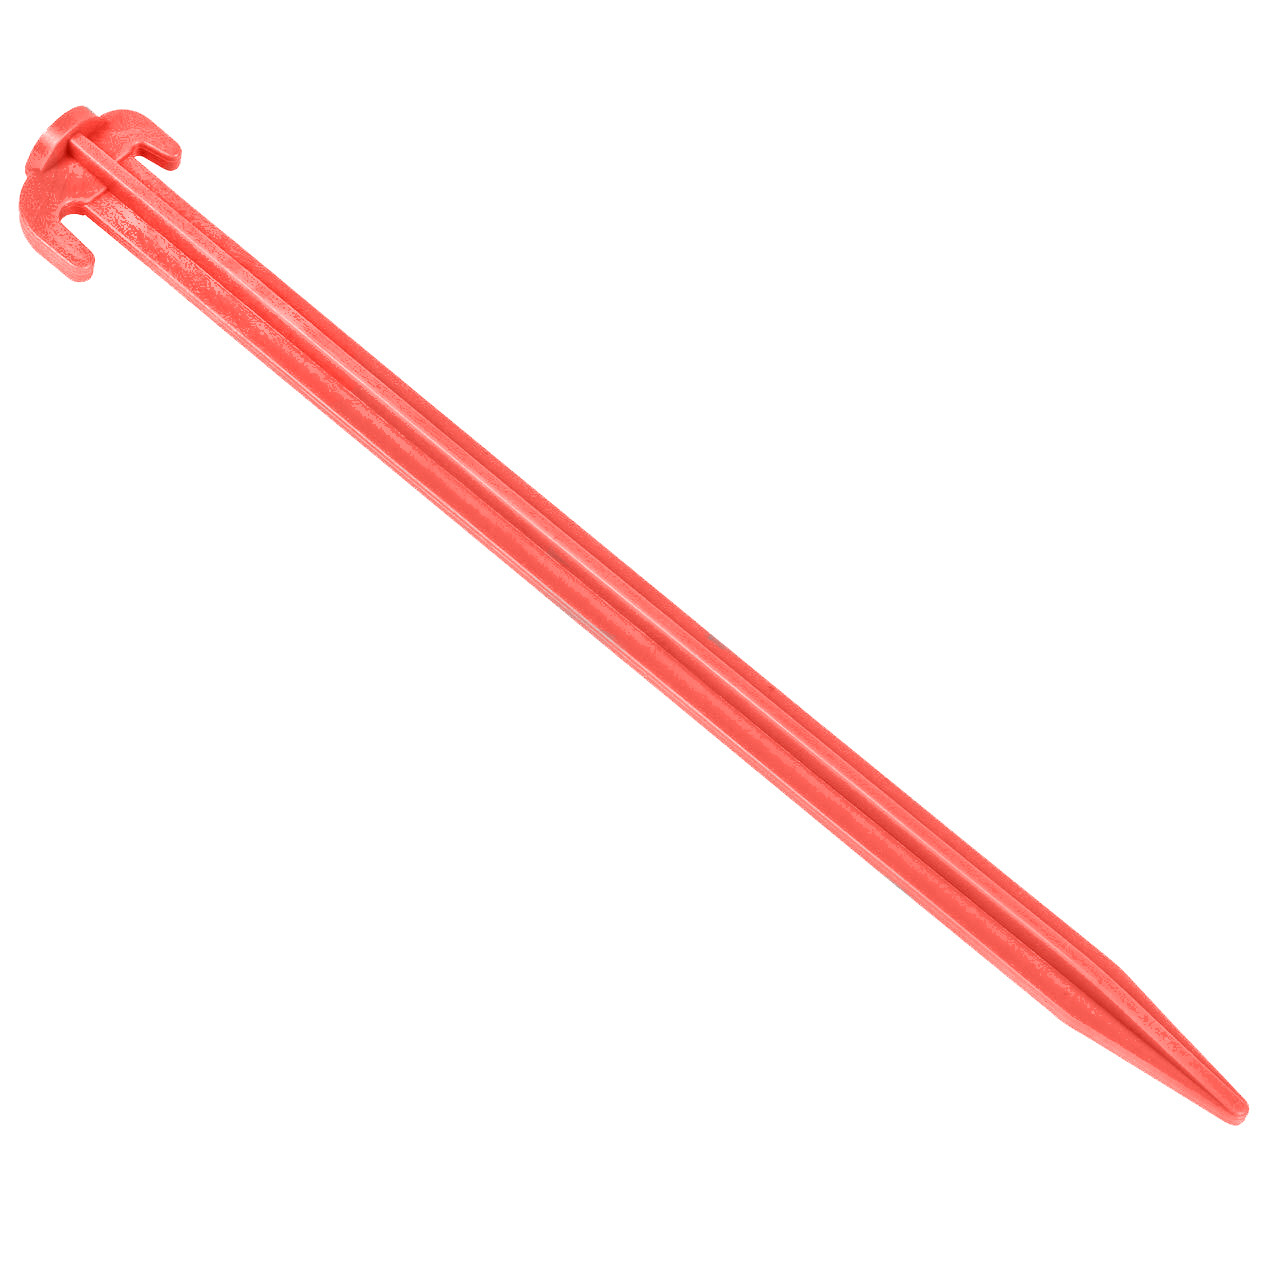 12 Inch Plastic tent peg from Camperite Leisure